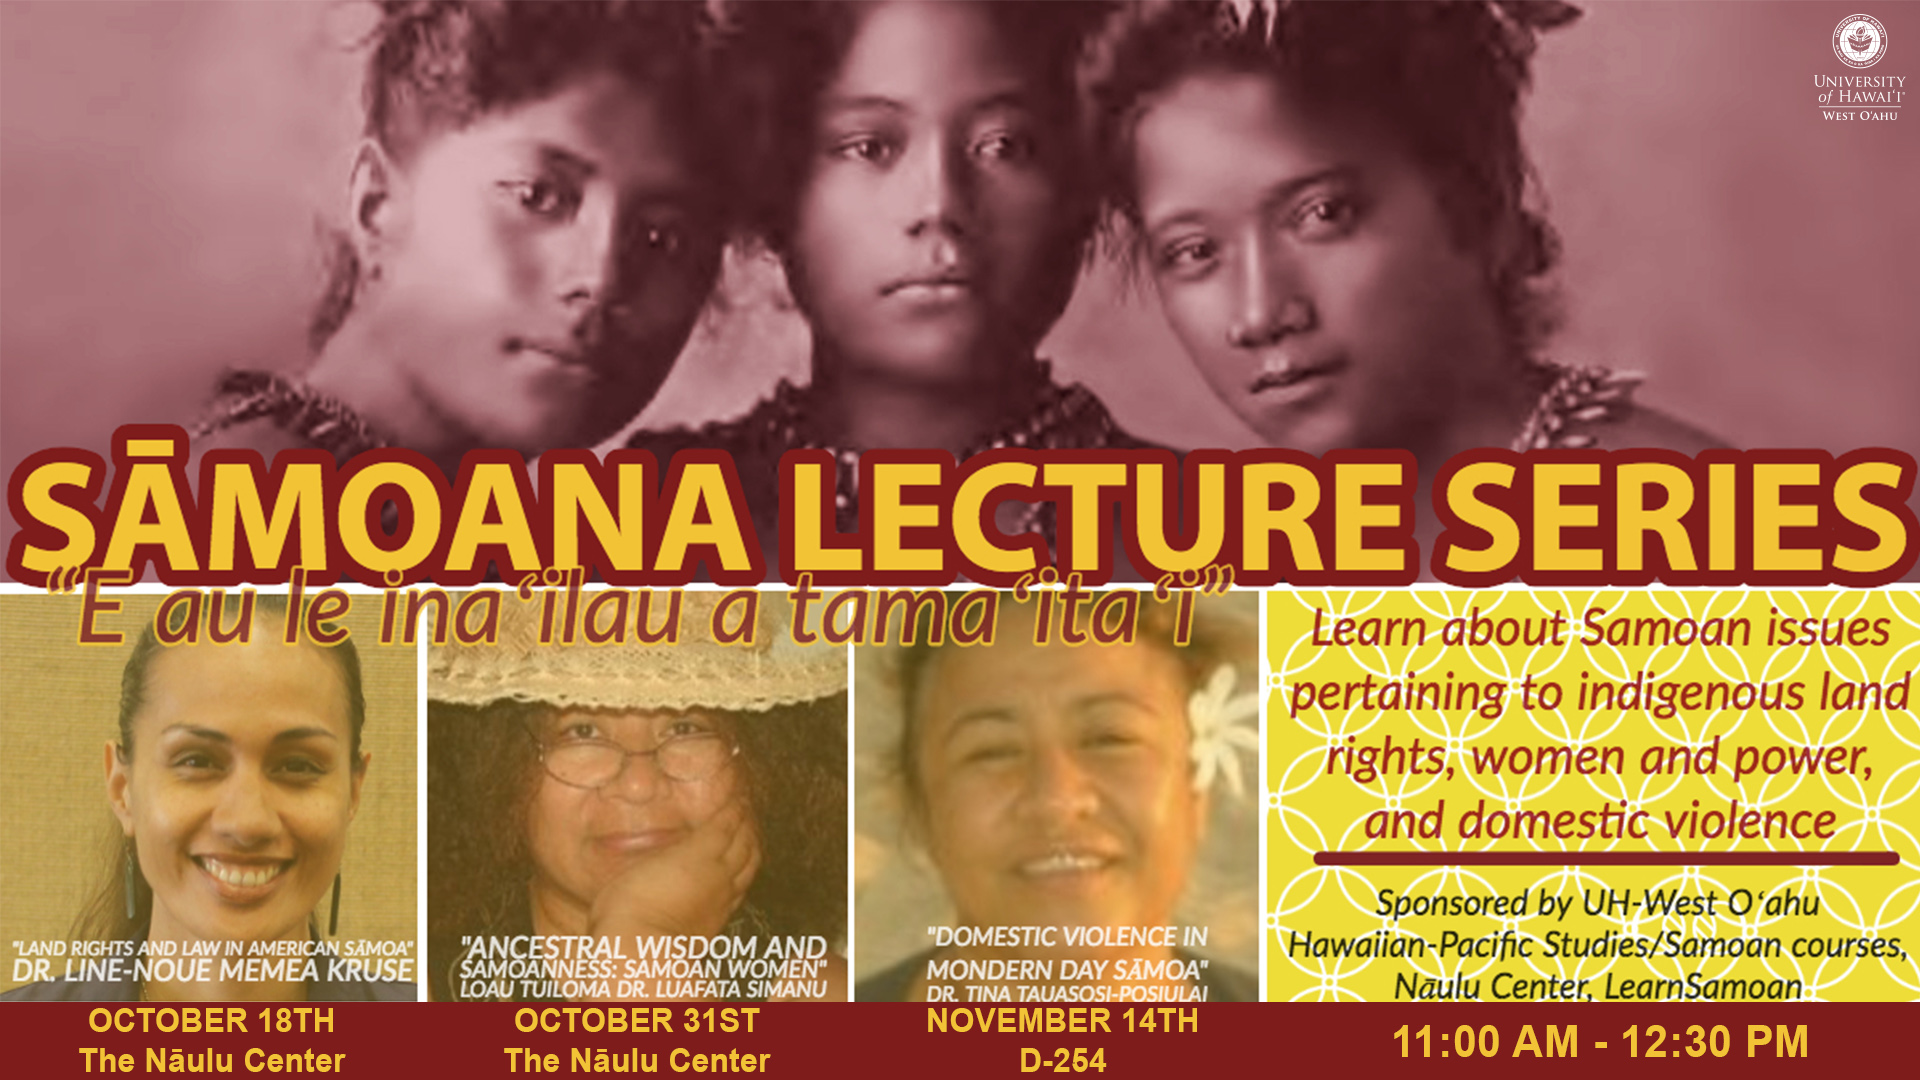 Flier for Samoana Lecture series showing same information as is contained in the artilce.